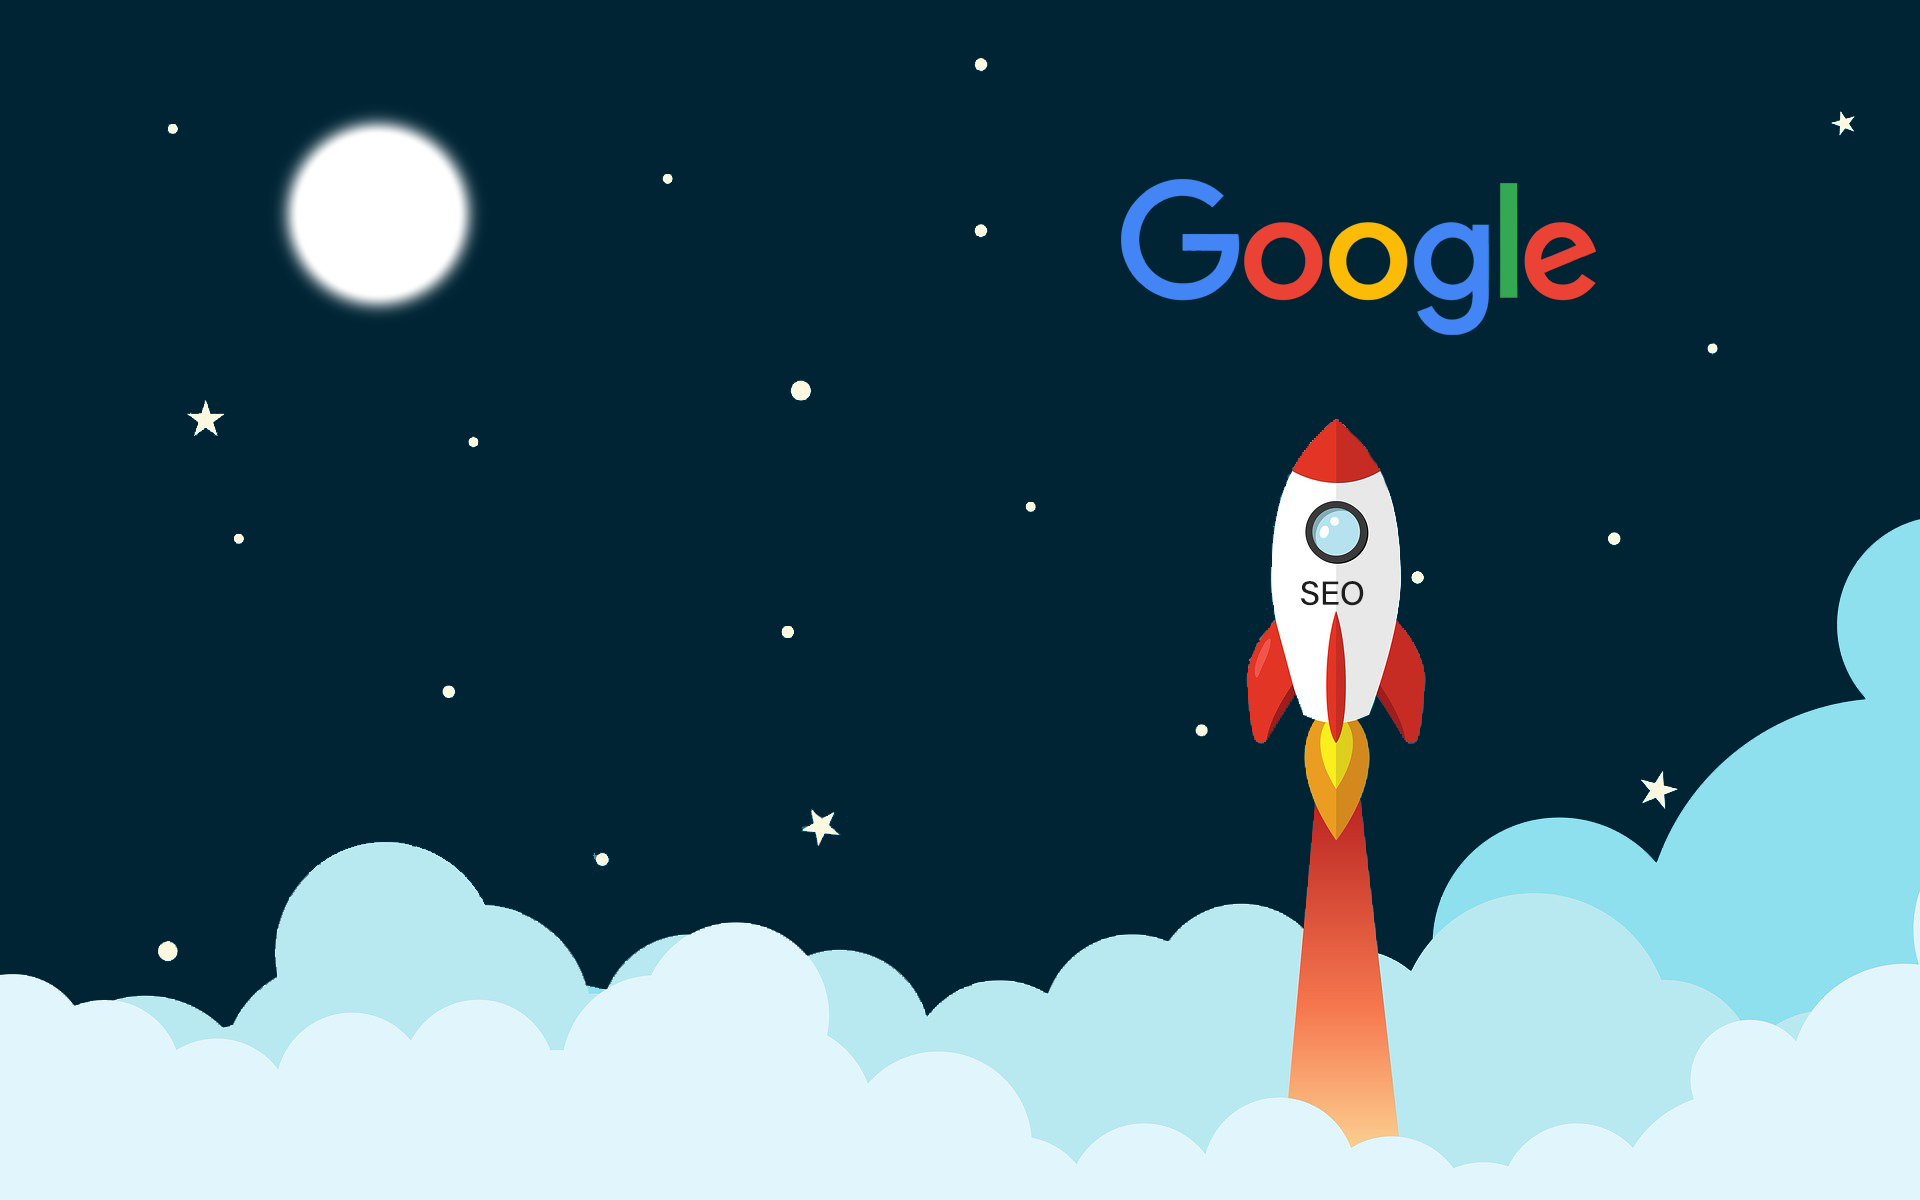 Use SEO to get on first pages on Google